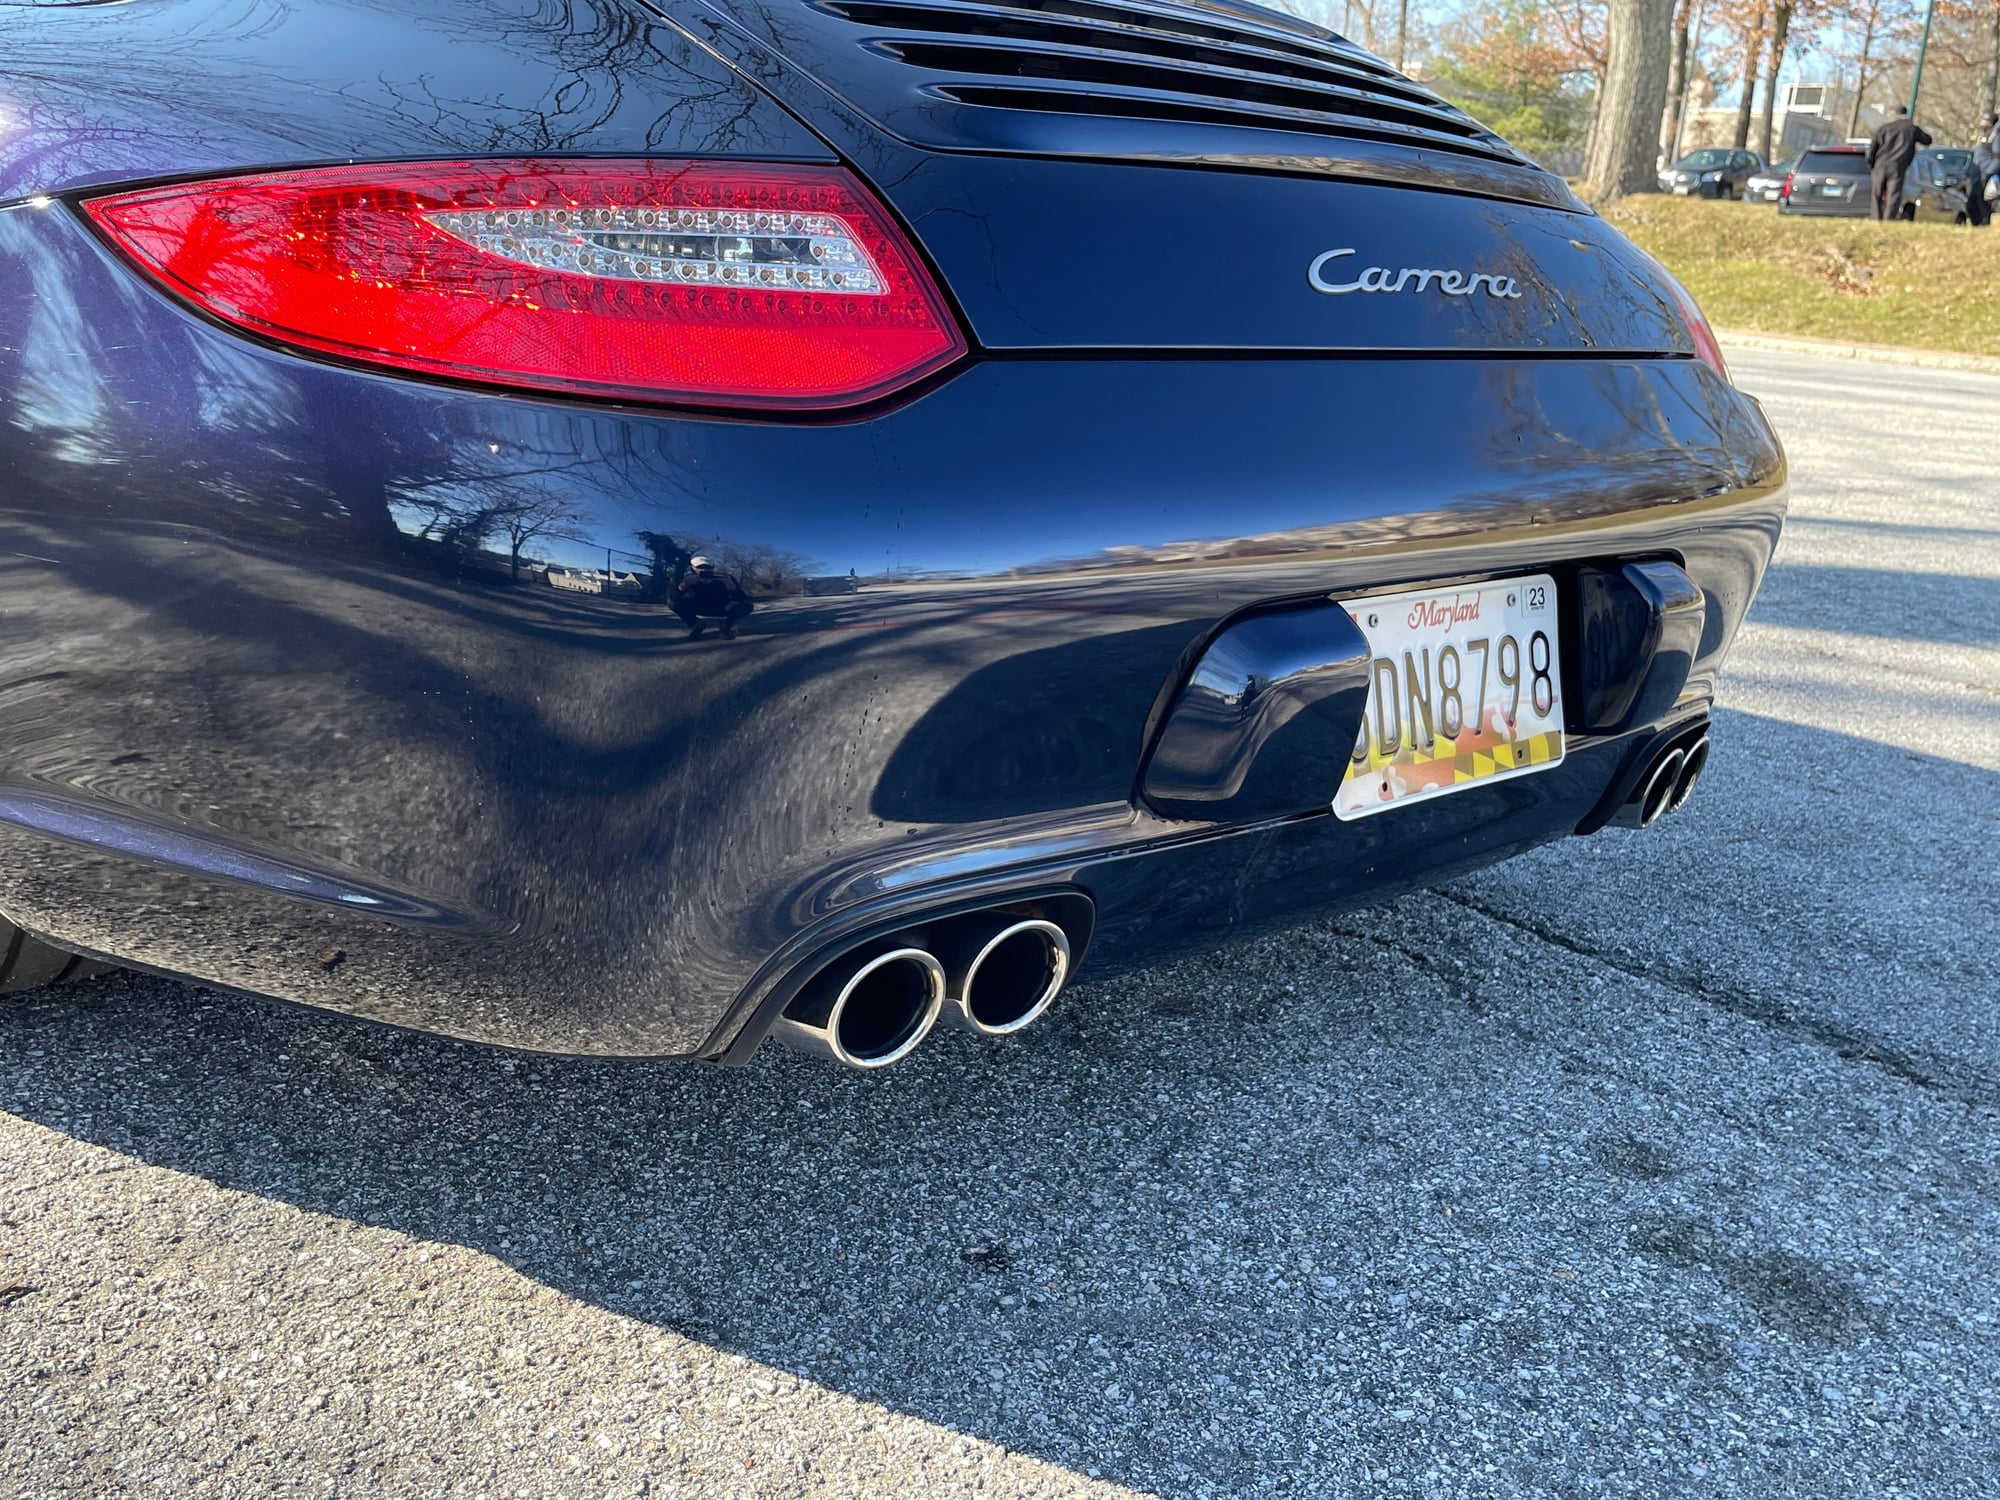 2009 Porsche 911 - 2009 911 Carrera 997.2 6MT Midnight Blue - Used - VIN WP0AA29949S707408 - 99,700 Miles - 6 cyl - 2WD - Manual - Coupe - Blue - Baltimore, MD 21212, United States